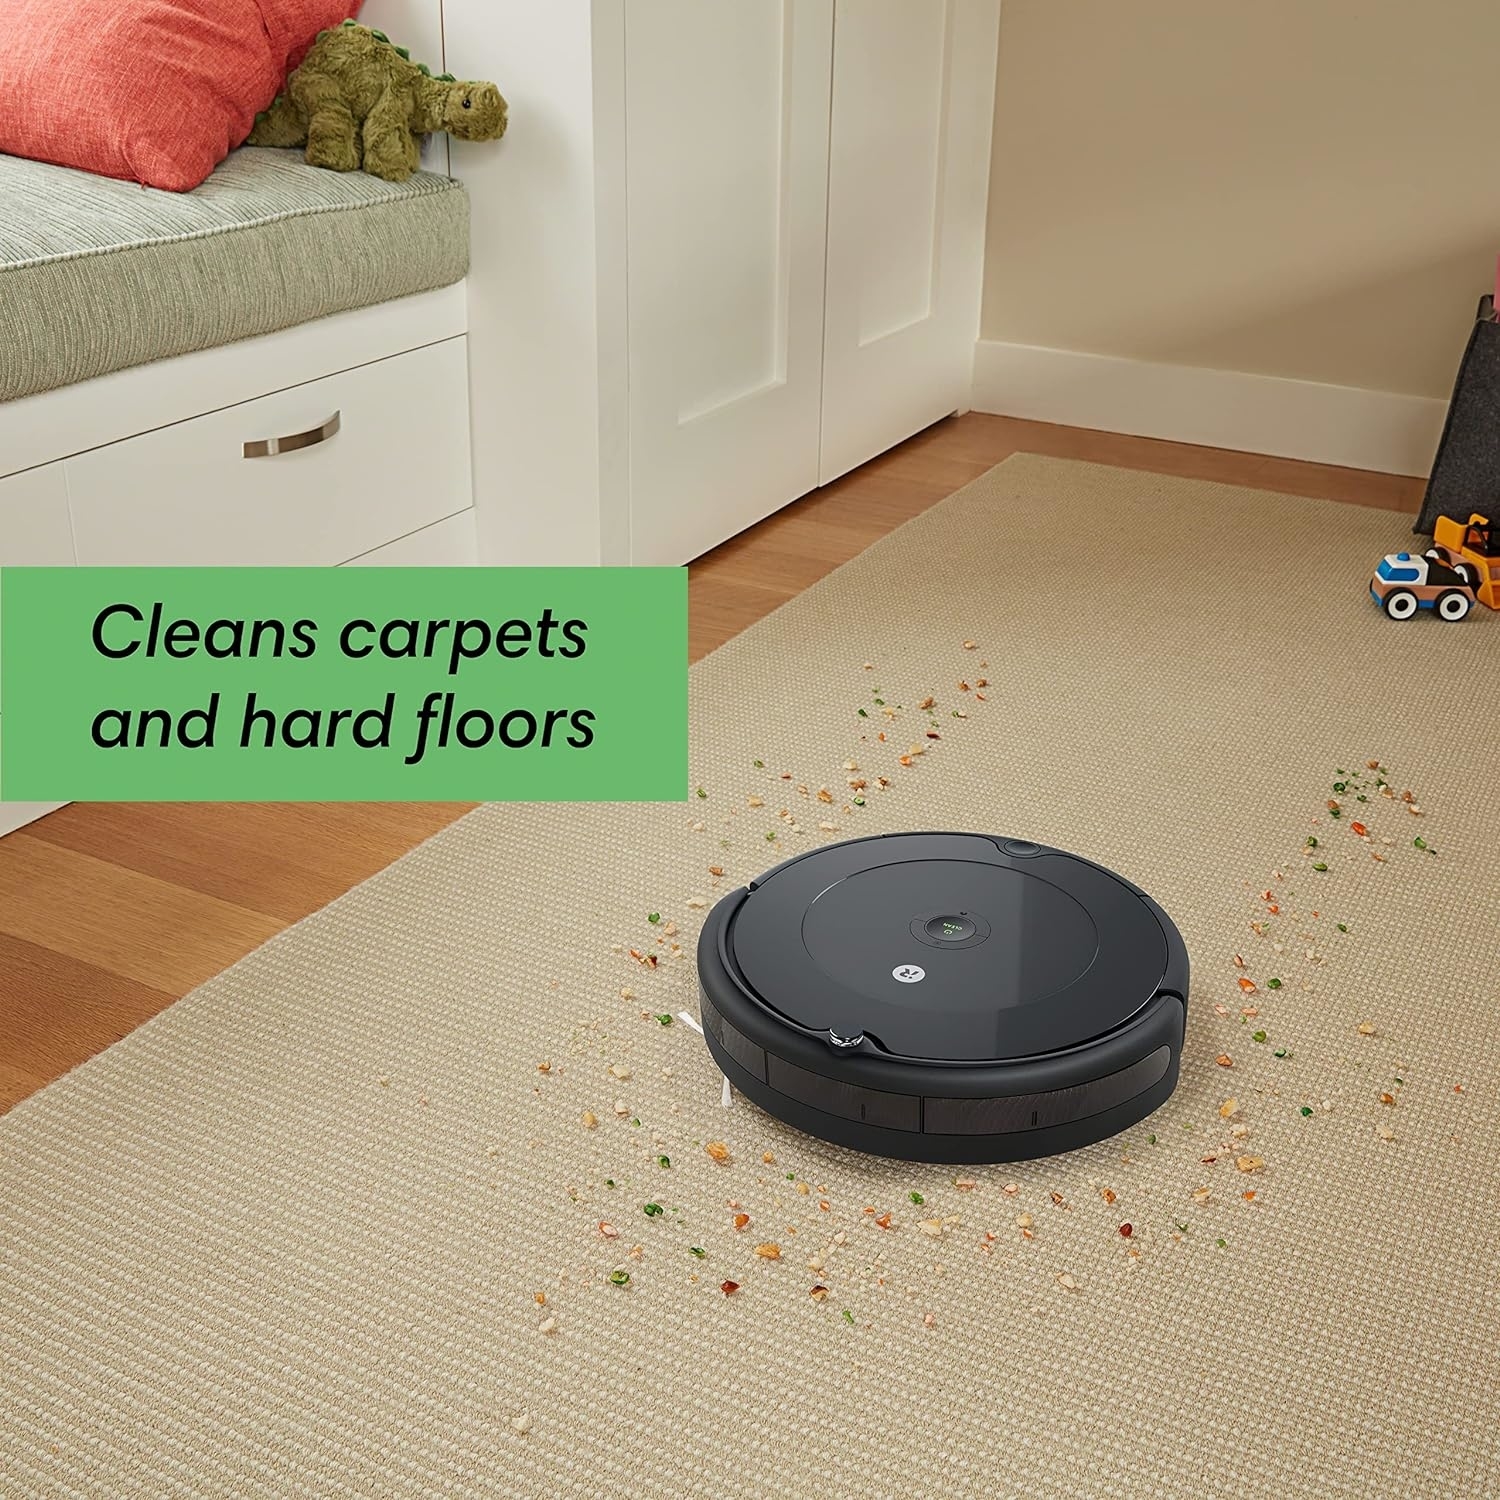 The roomba which cleans carpet and hard floors